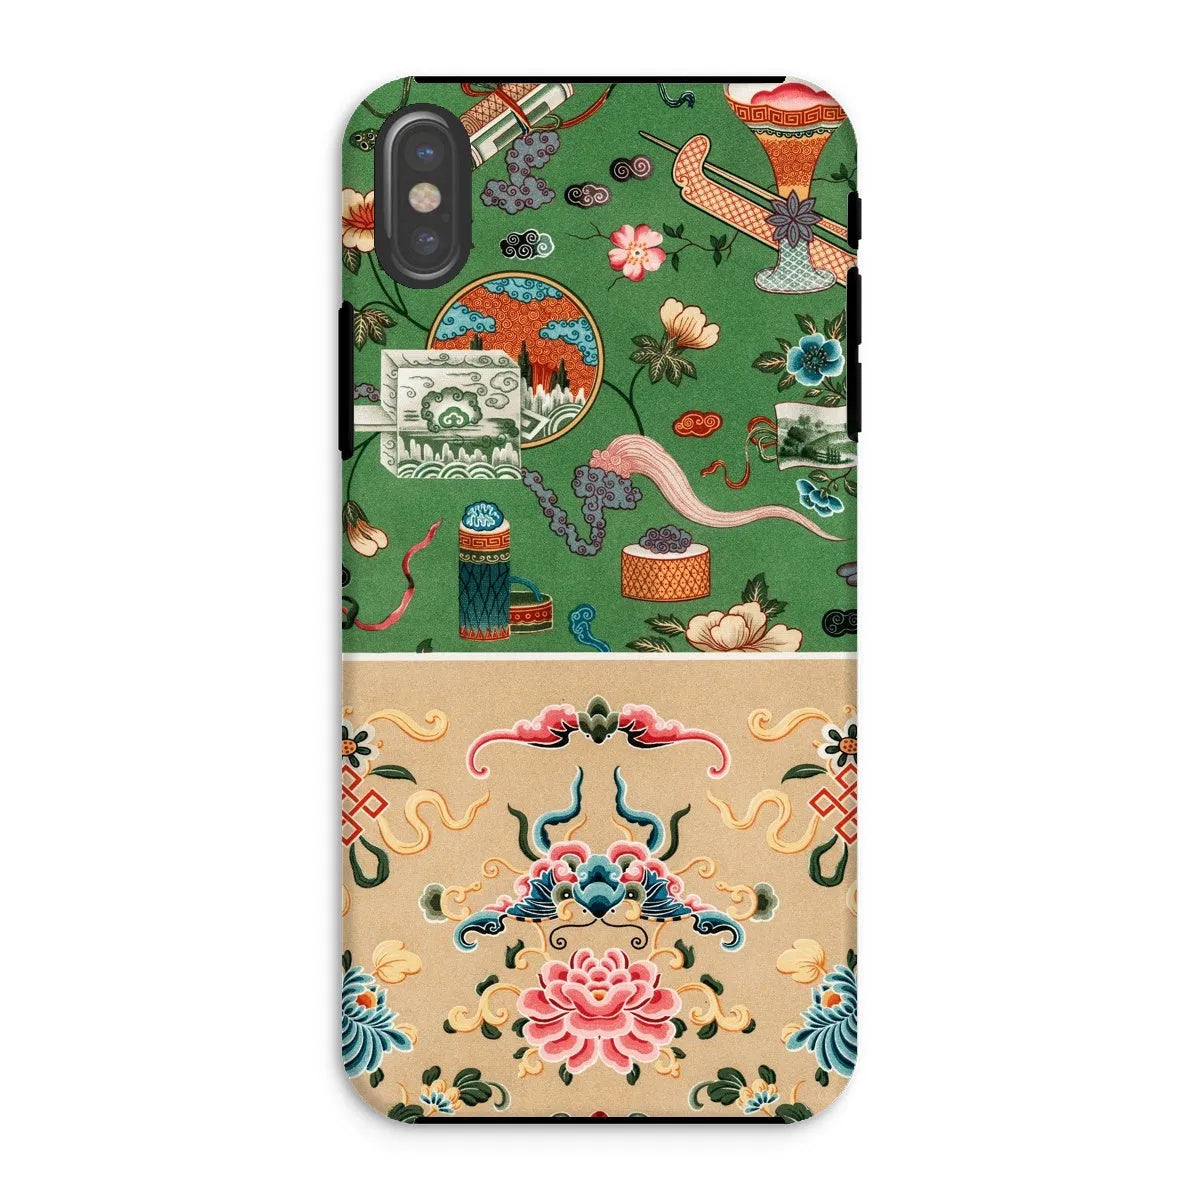 This Chinese Pattern By Auguste Racinet Tough Phone Case - Iphone Xs / Matte - Mobile Phone Cases - Aesthetic Art